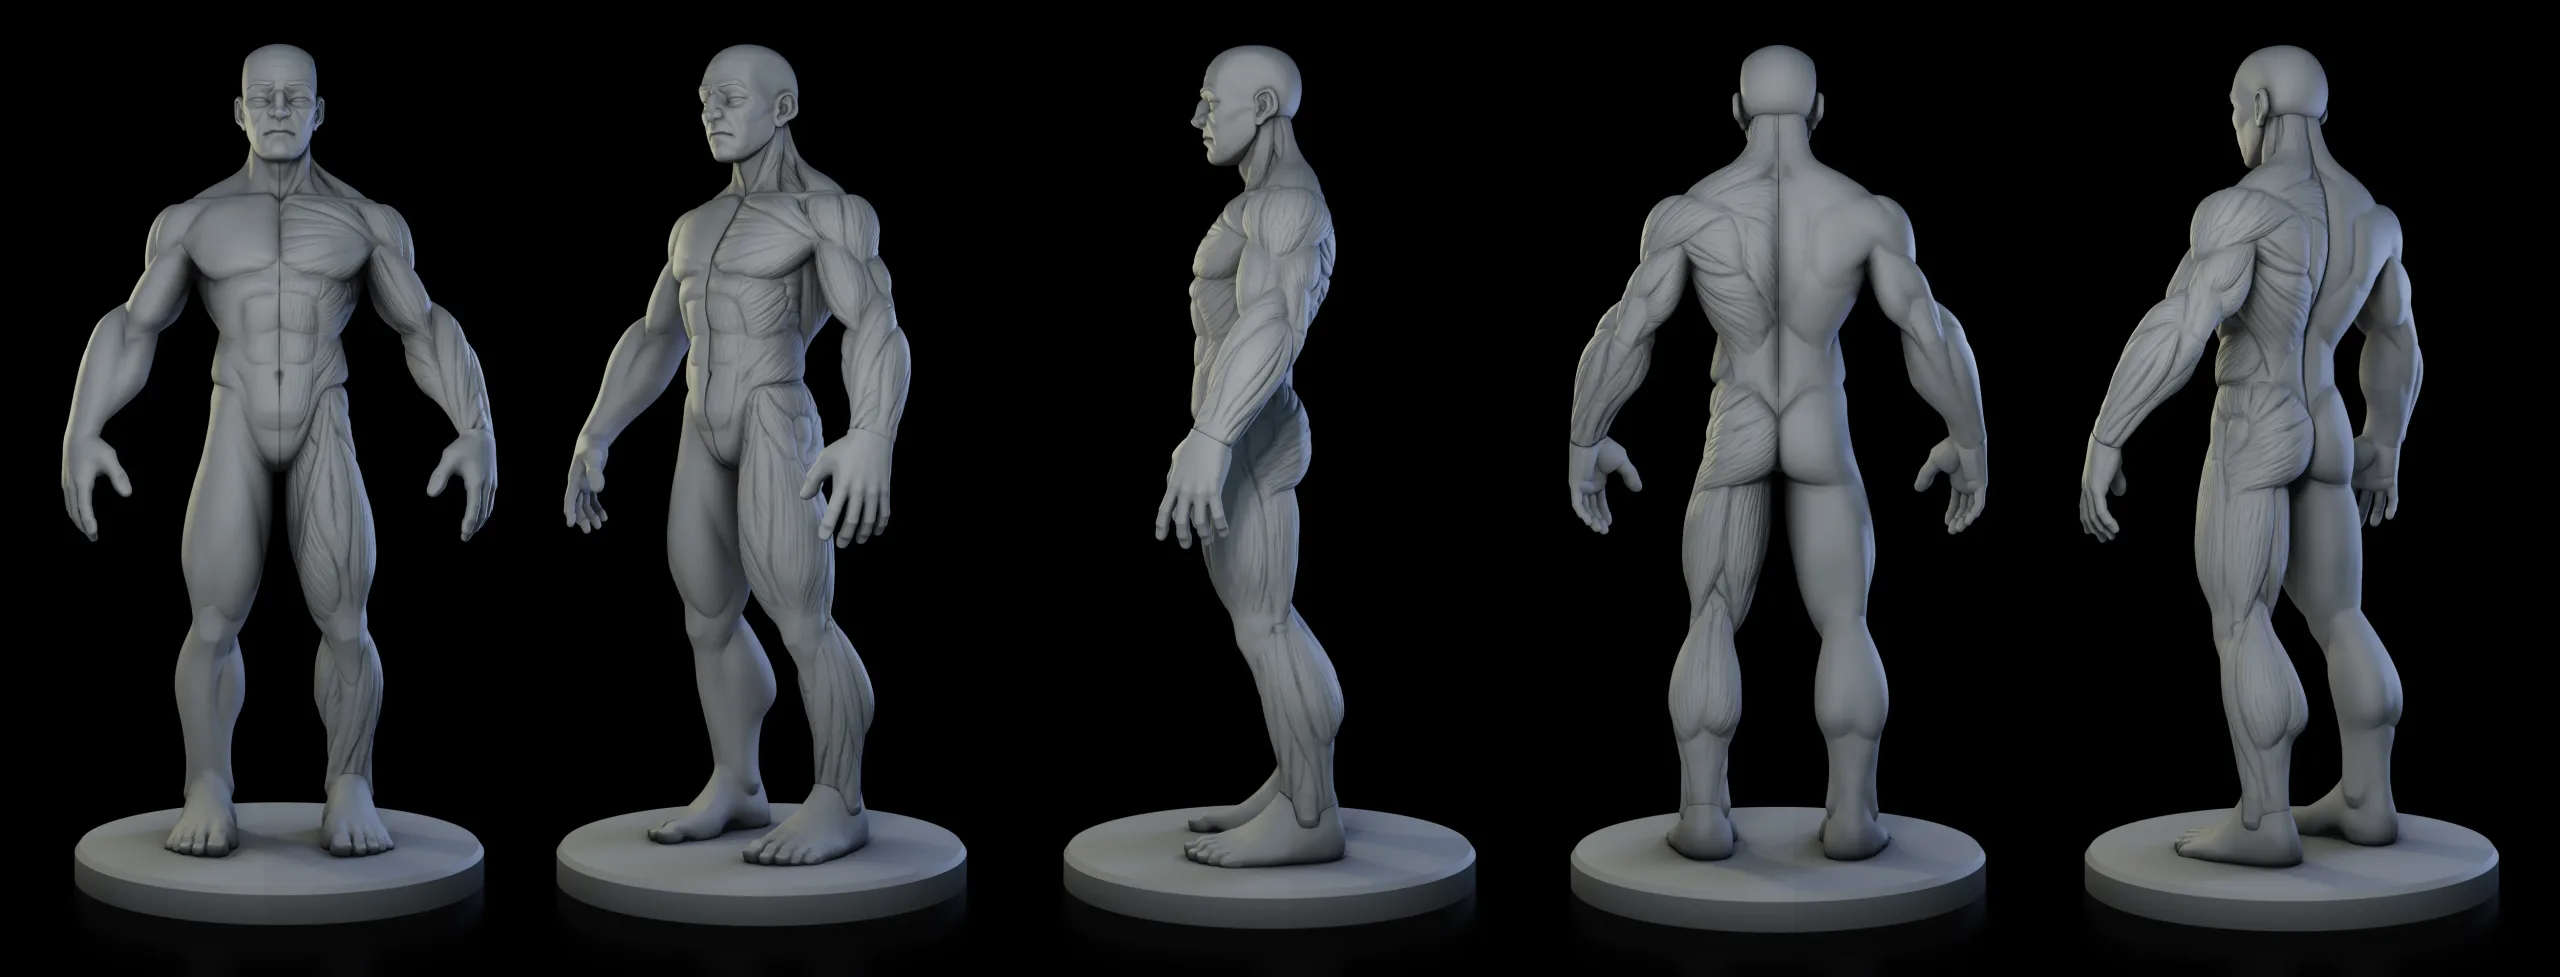 Stylized Male Ecorche Pack - Ready to Print